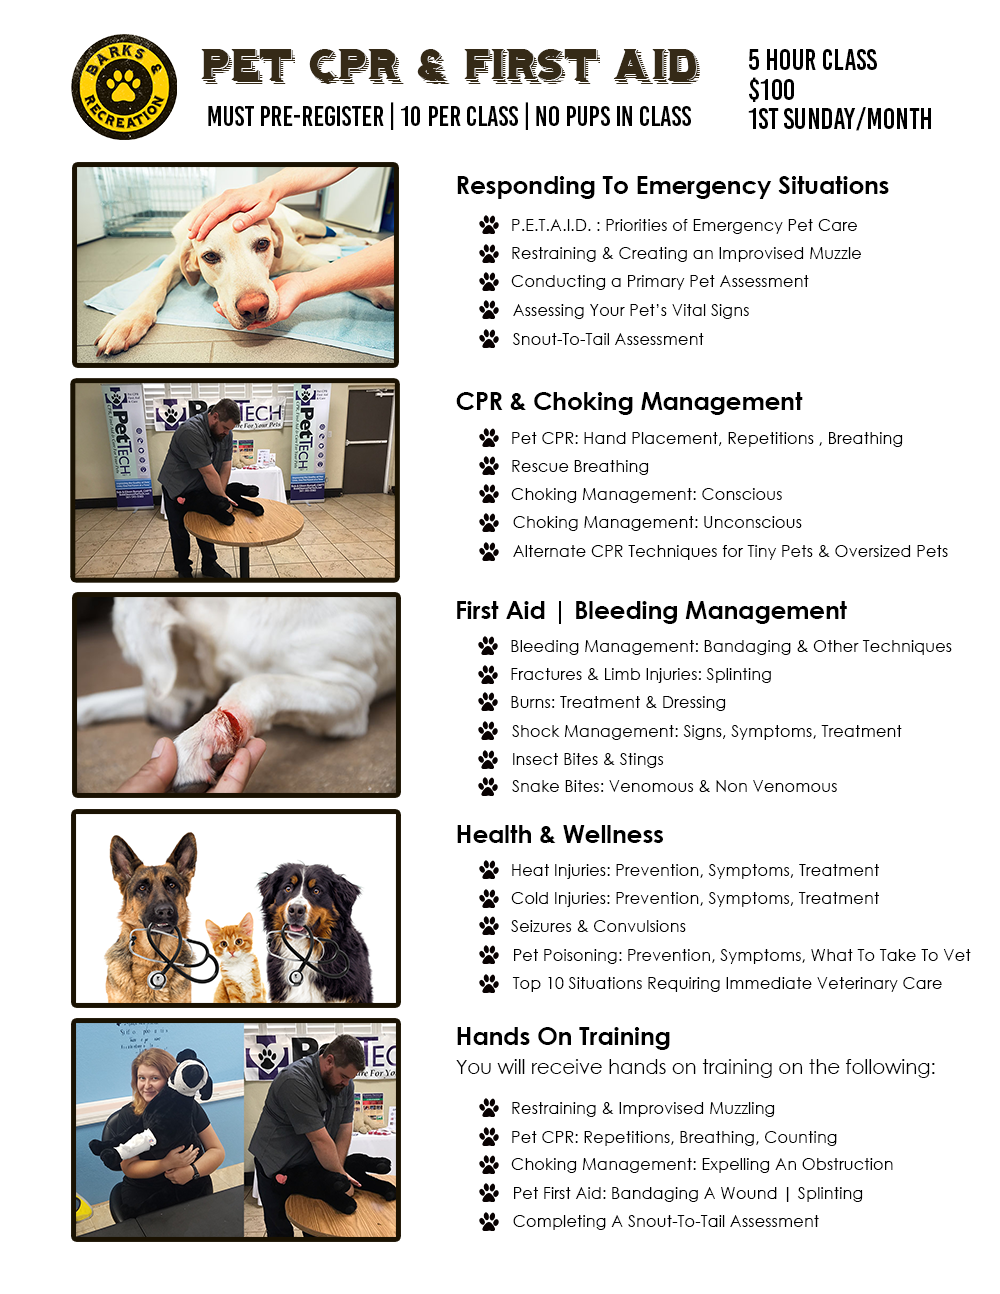 Pet CPR and First Aid Class Agenda – Barks and Recreation